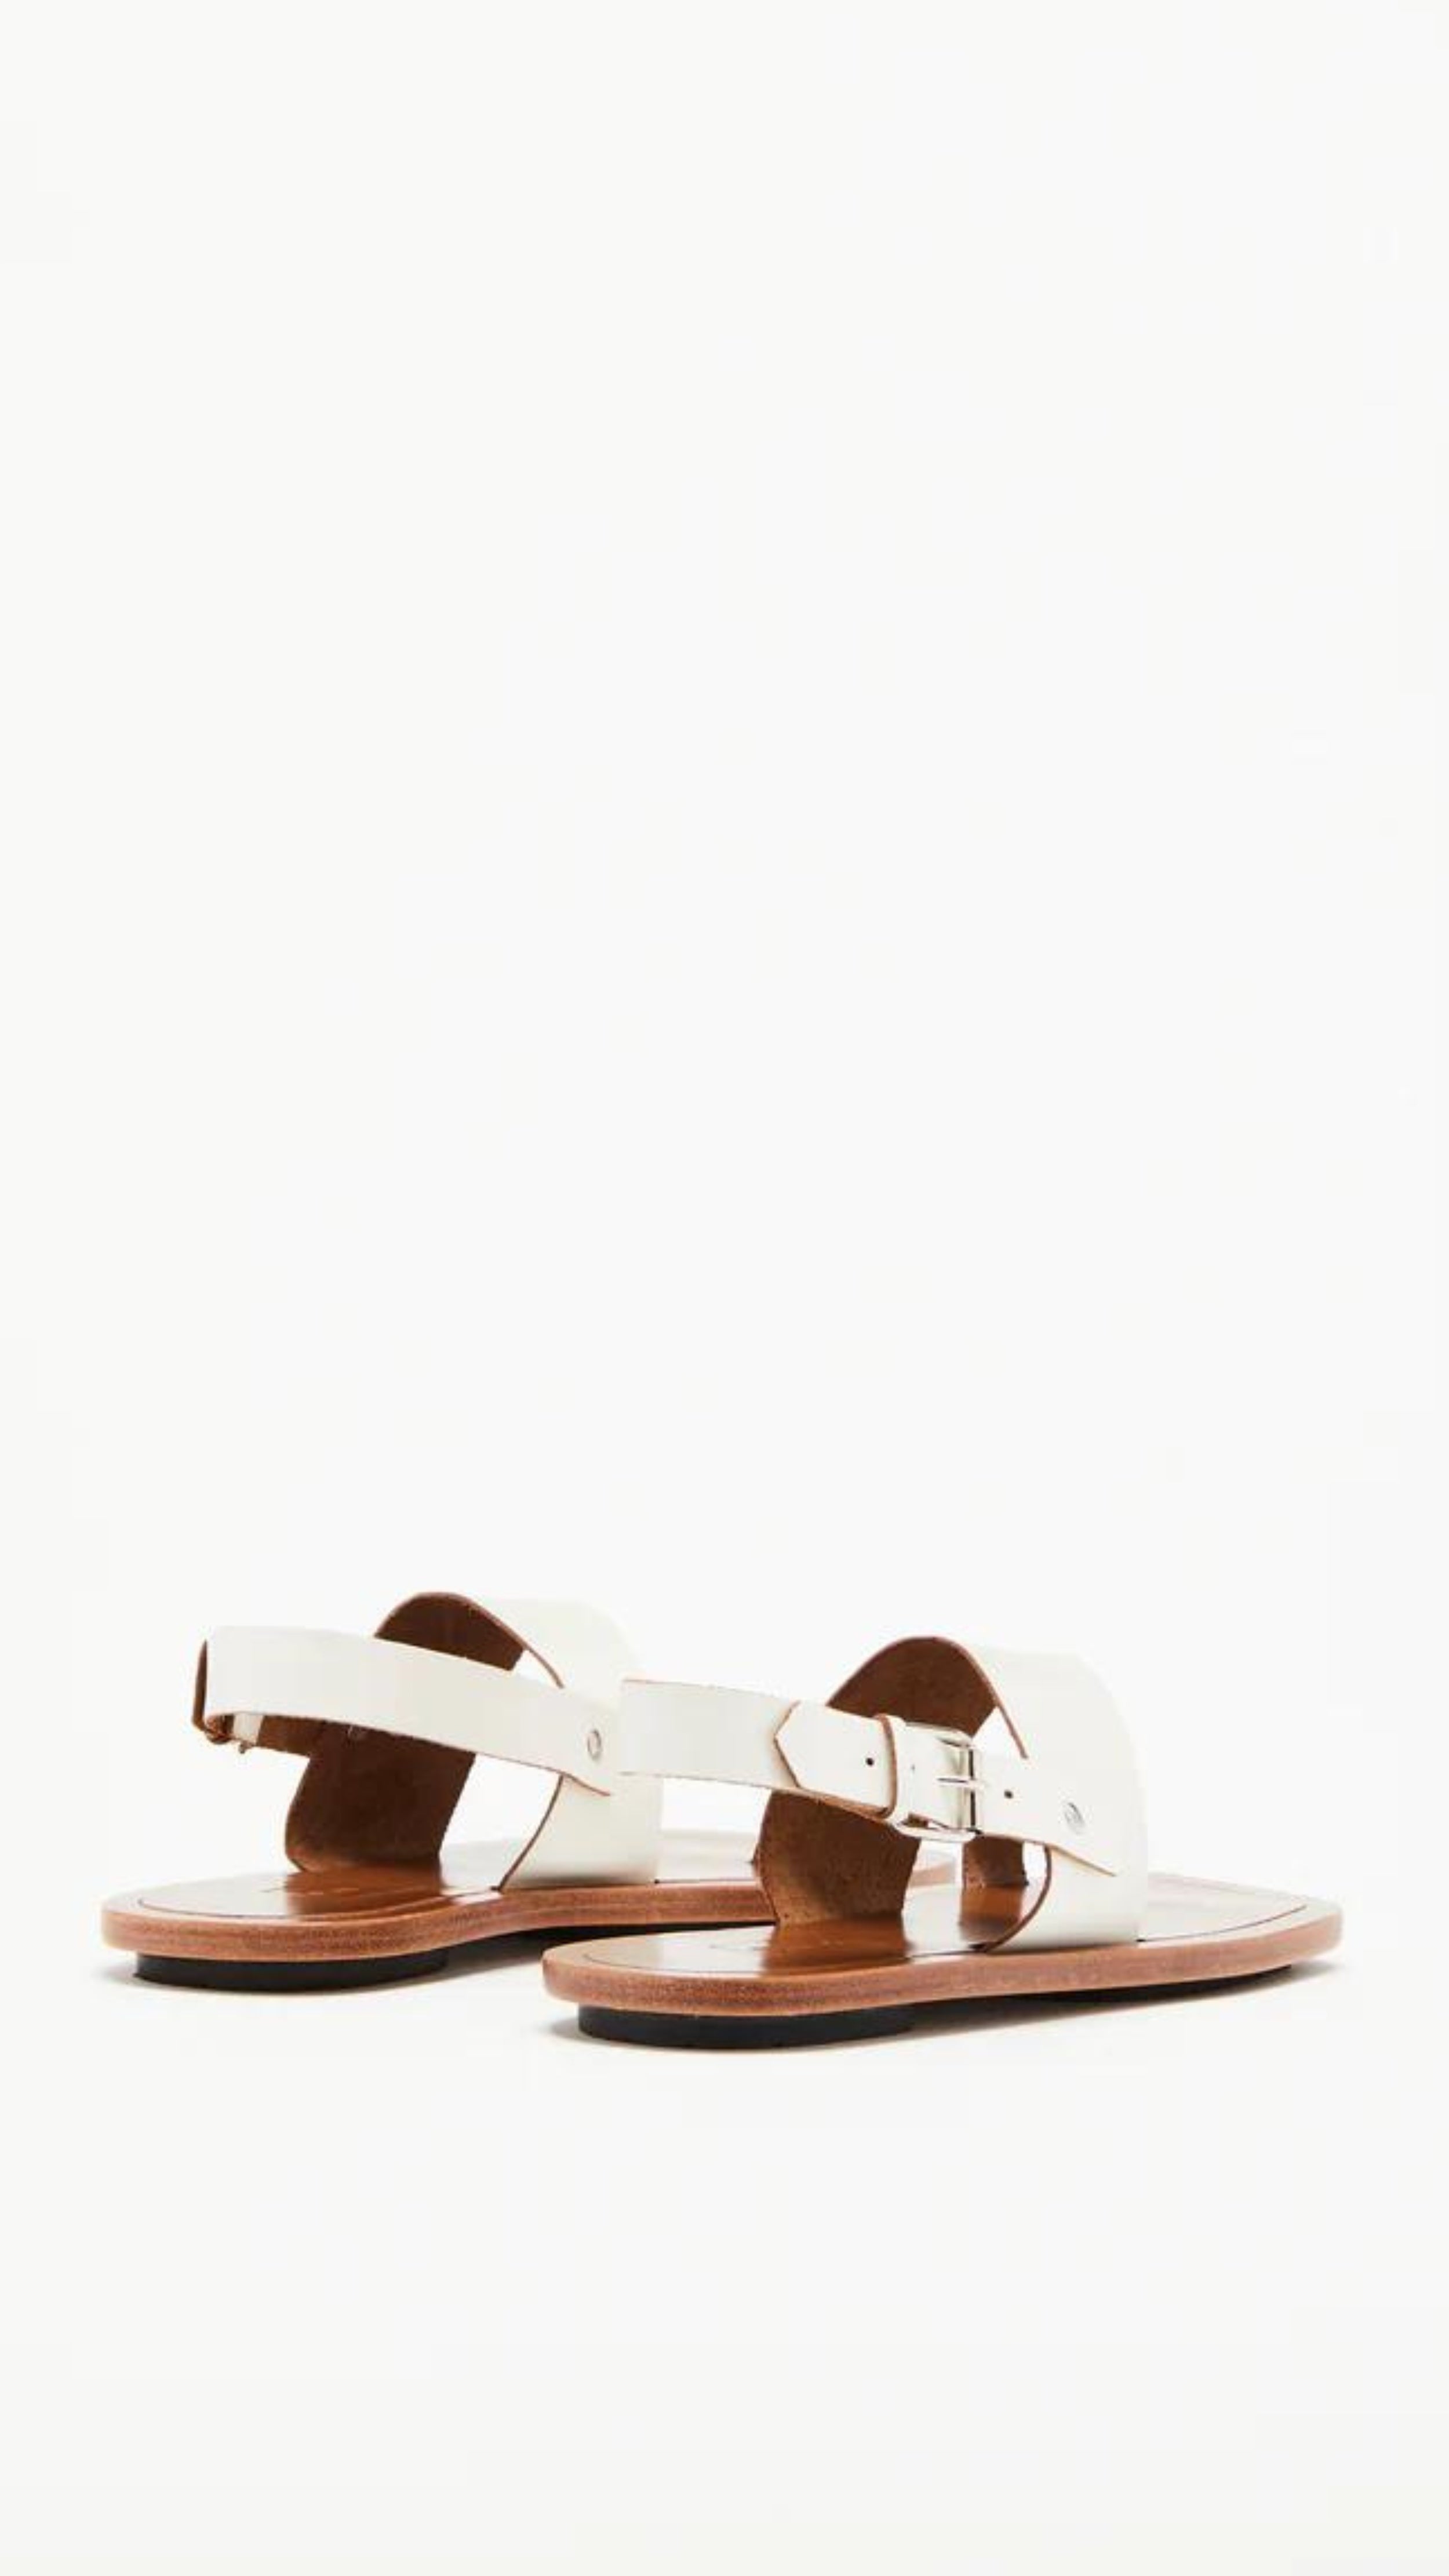 Plan C White Toe Ring Sandals. Made in Italy, these sandals have a strap across the foot, buckle around the heel and a ring of leather at the big toe. Flat sandals with a leather sole. Photo shown from the back.